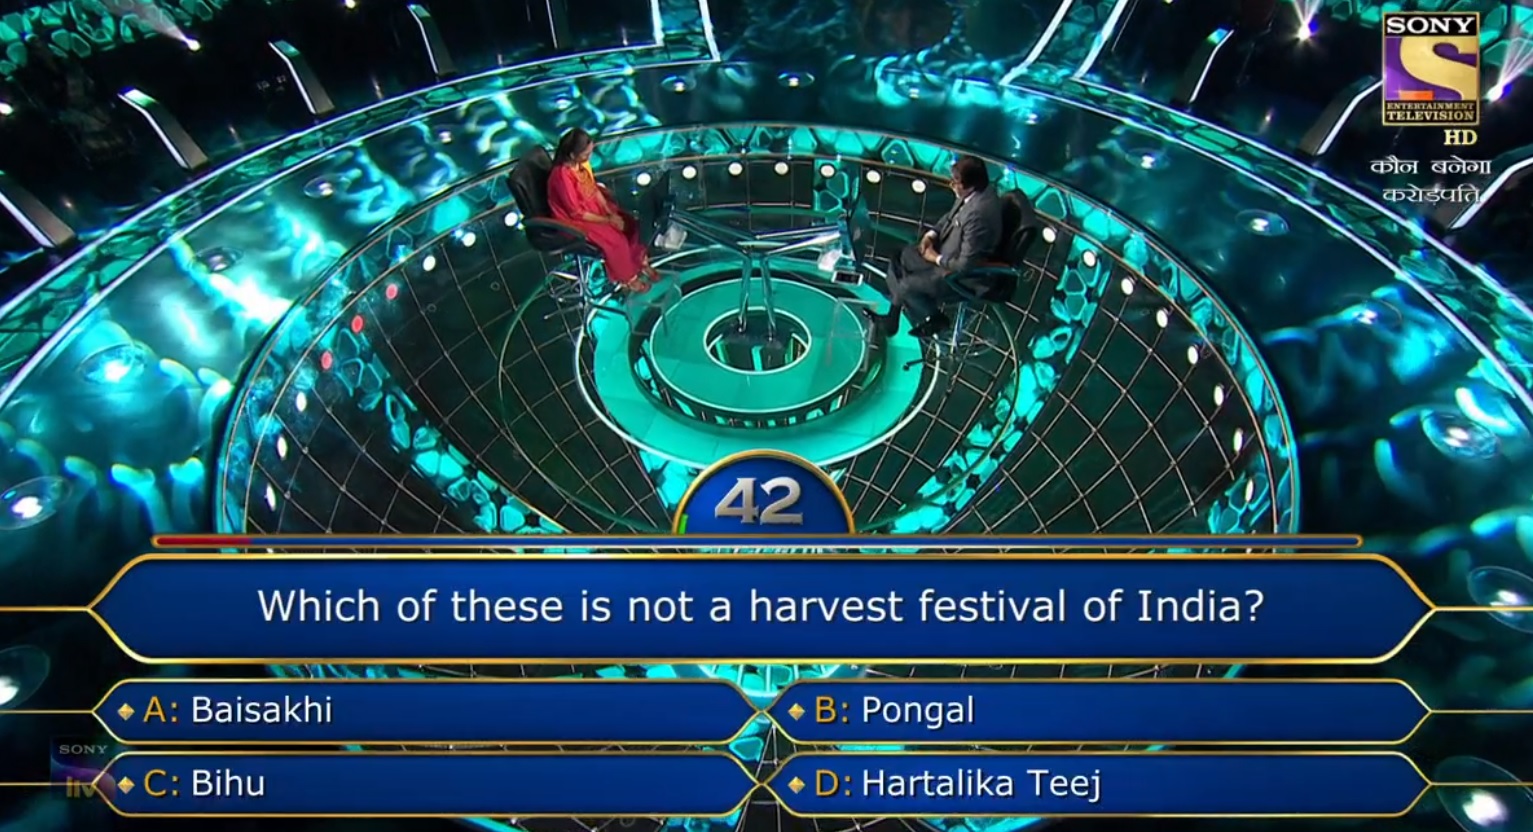 Ques : Which of these is not a harvest festival of India?